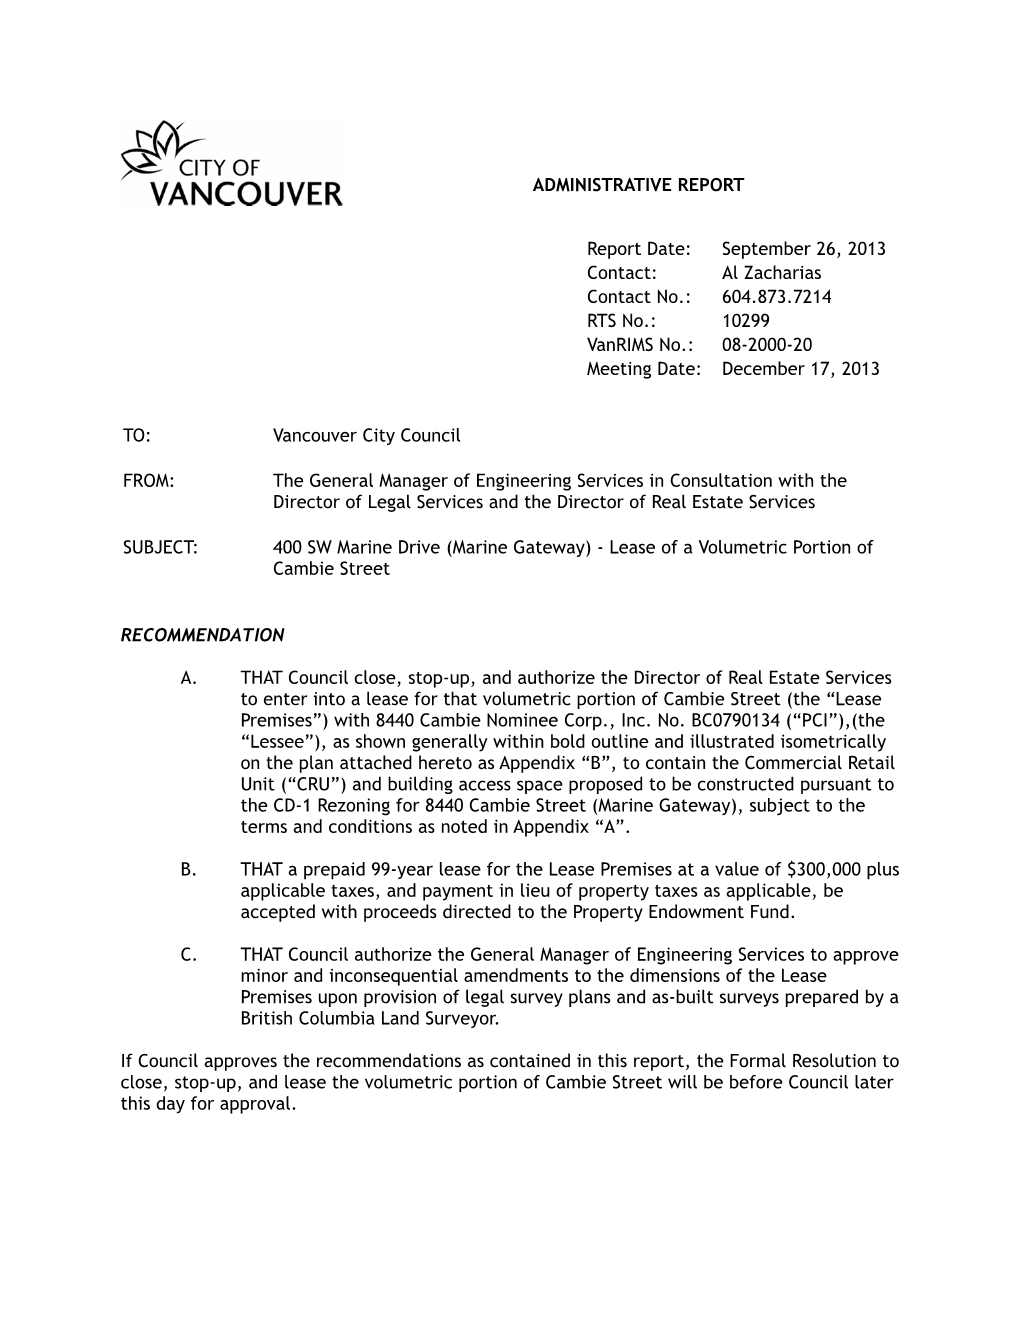 Marine Gateway) - Lease of a Volumetric Portion of Cambie Street